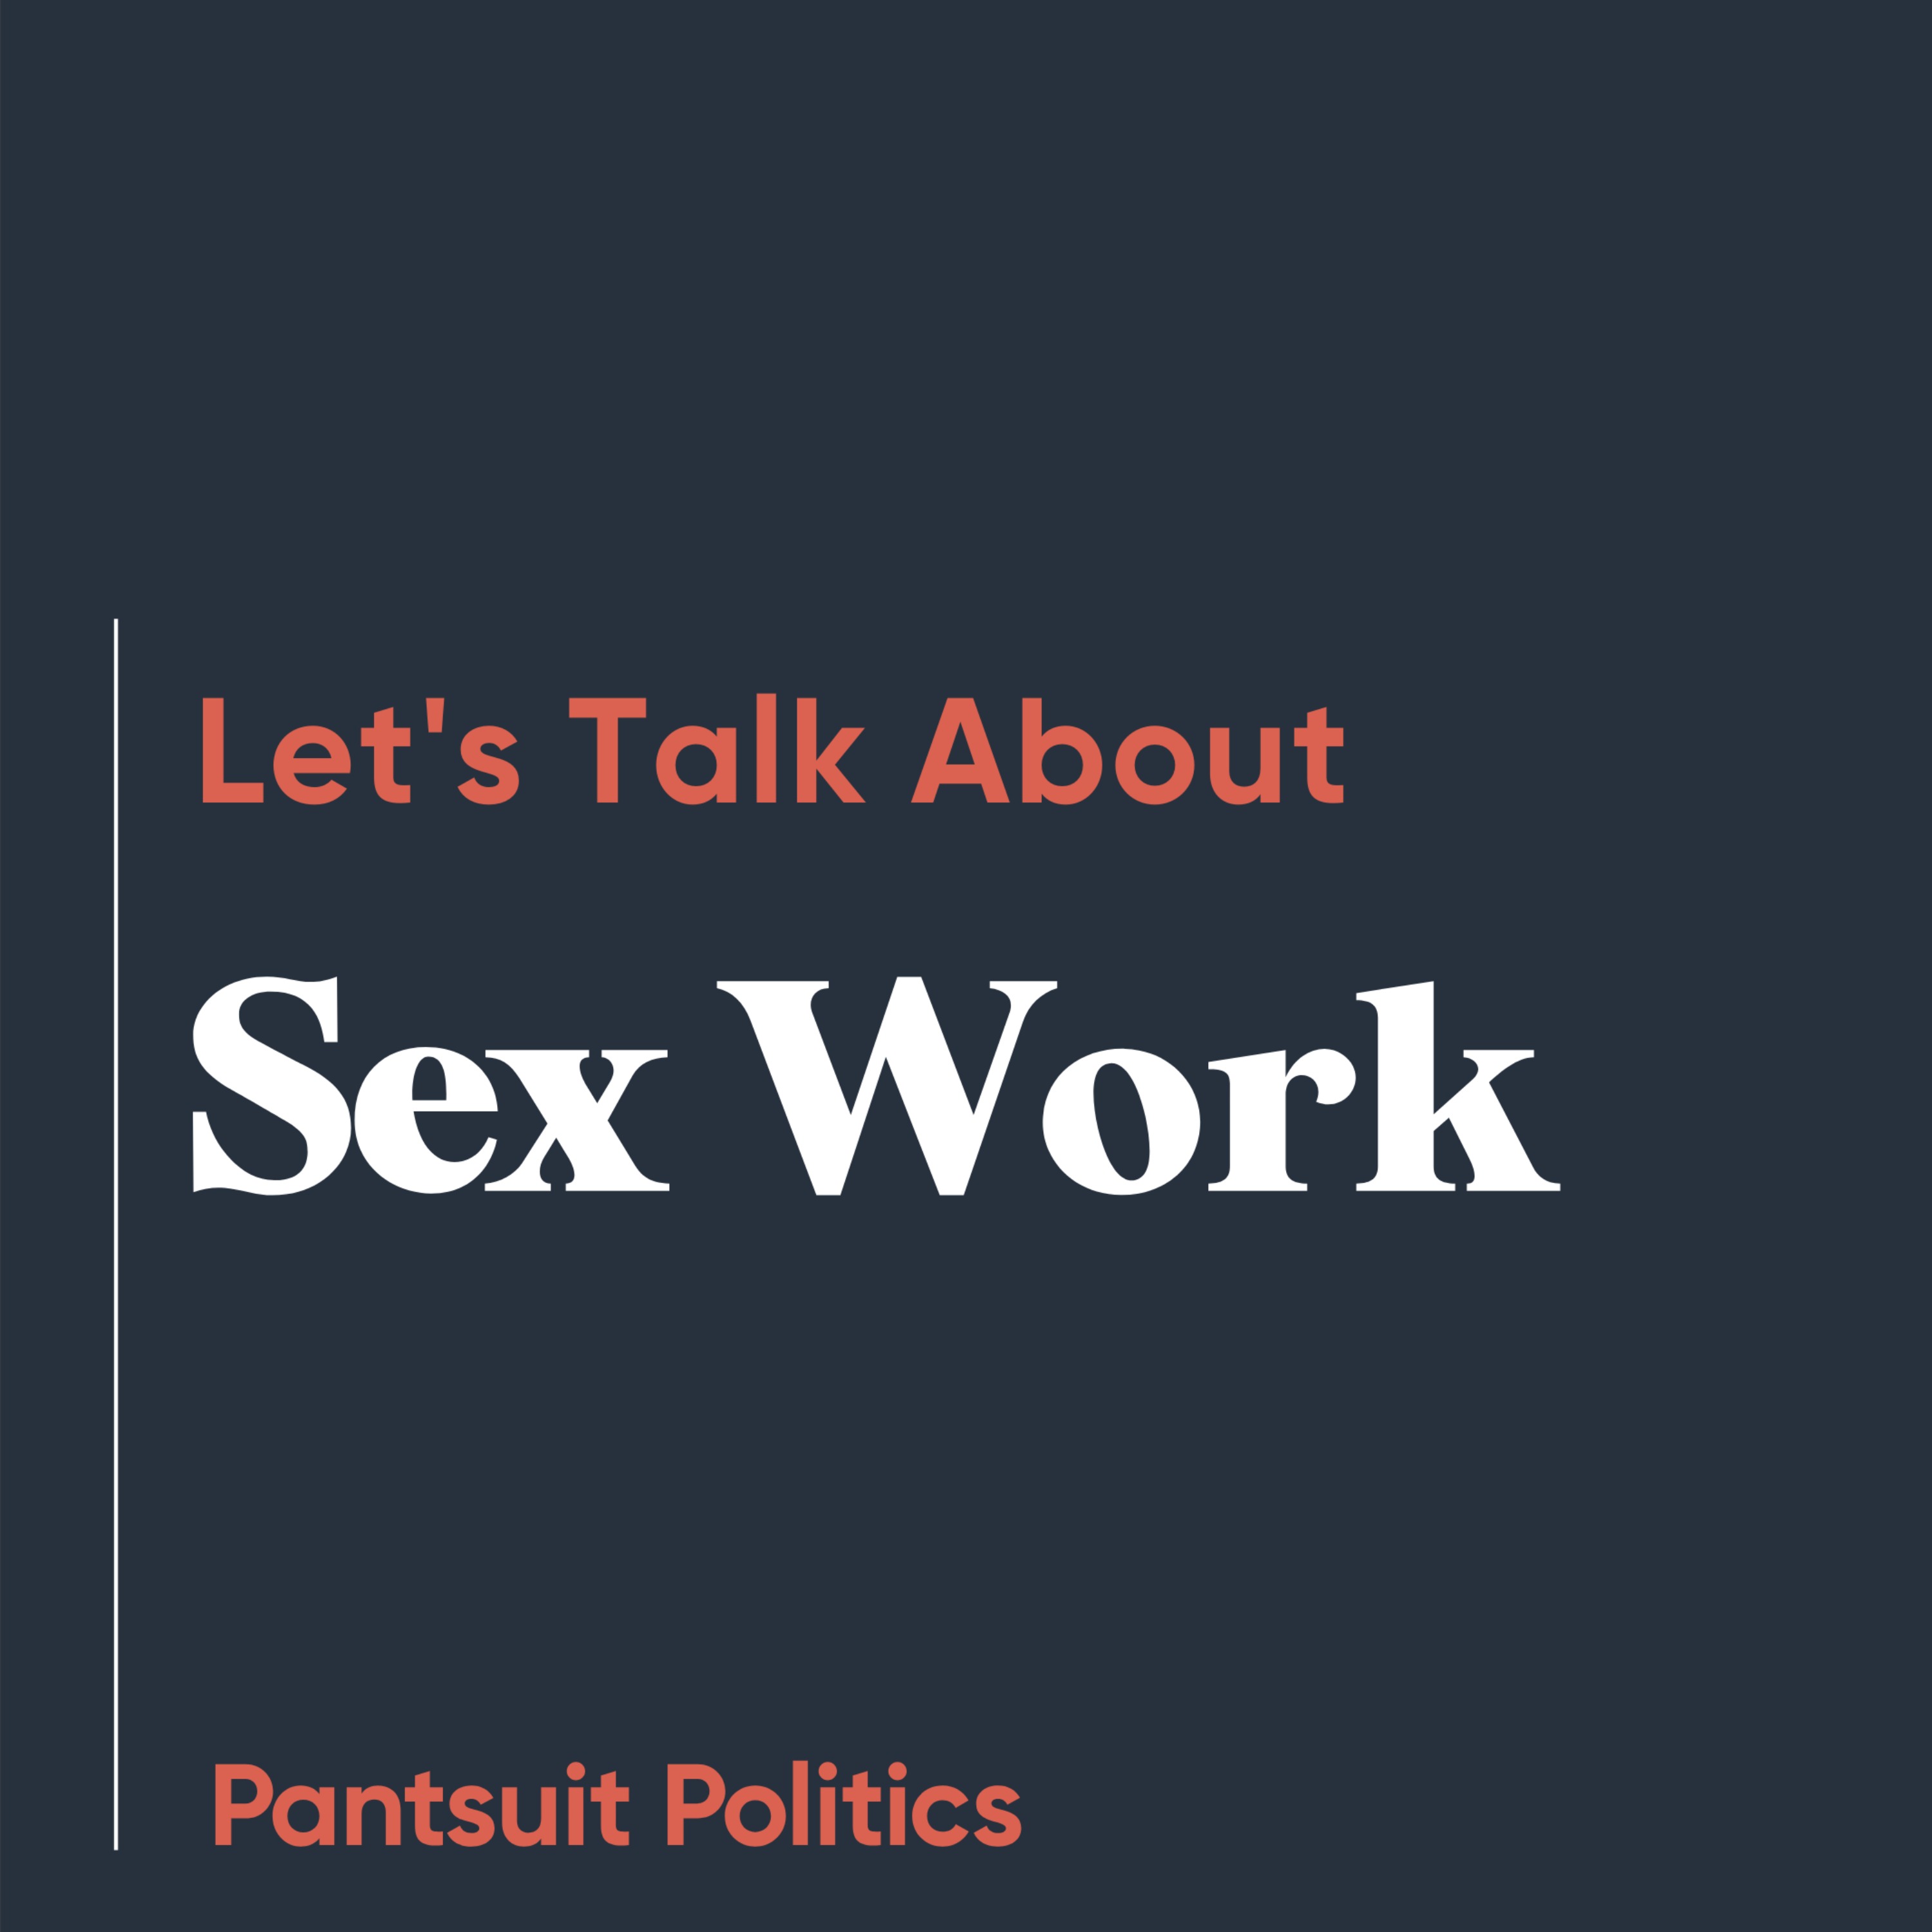 Let's Talk About Sex Work